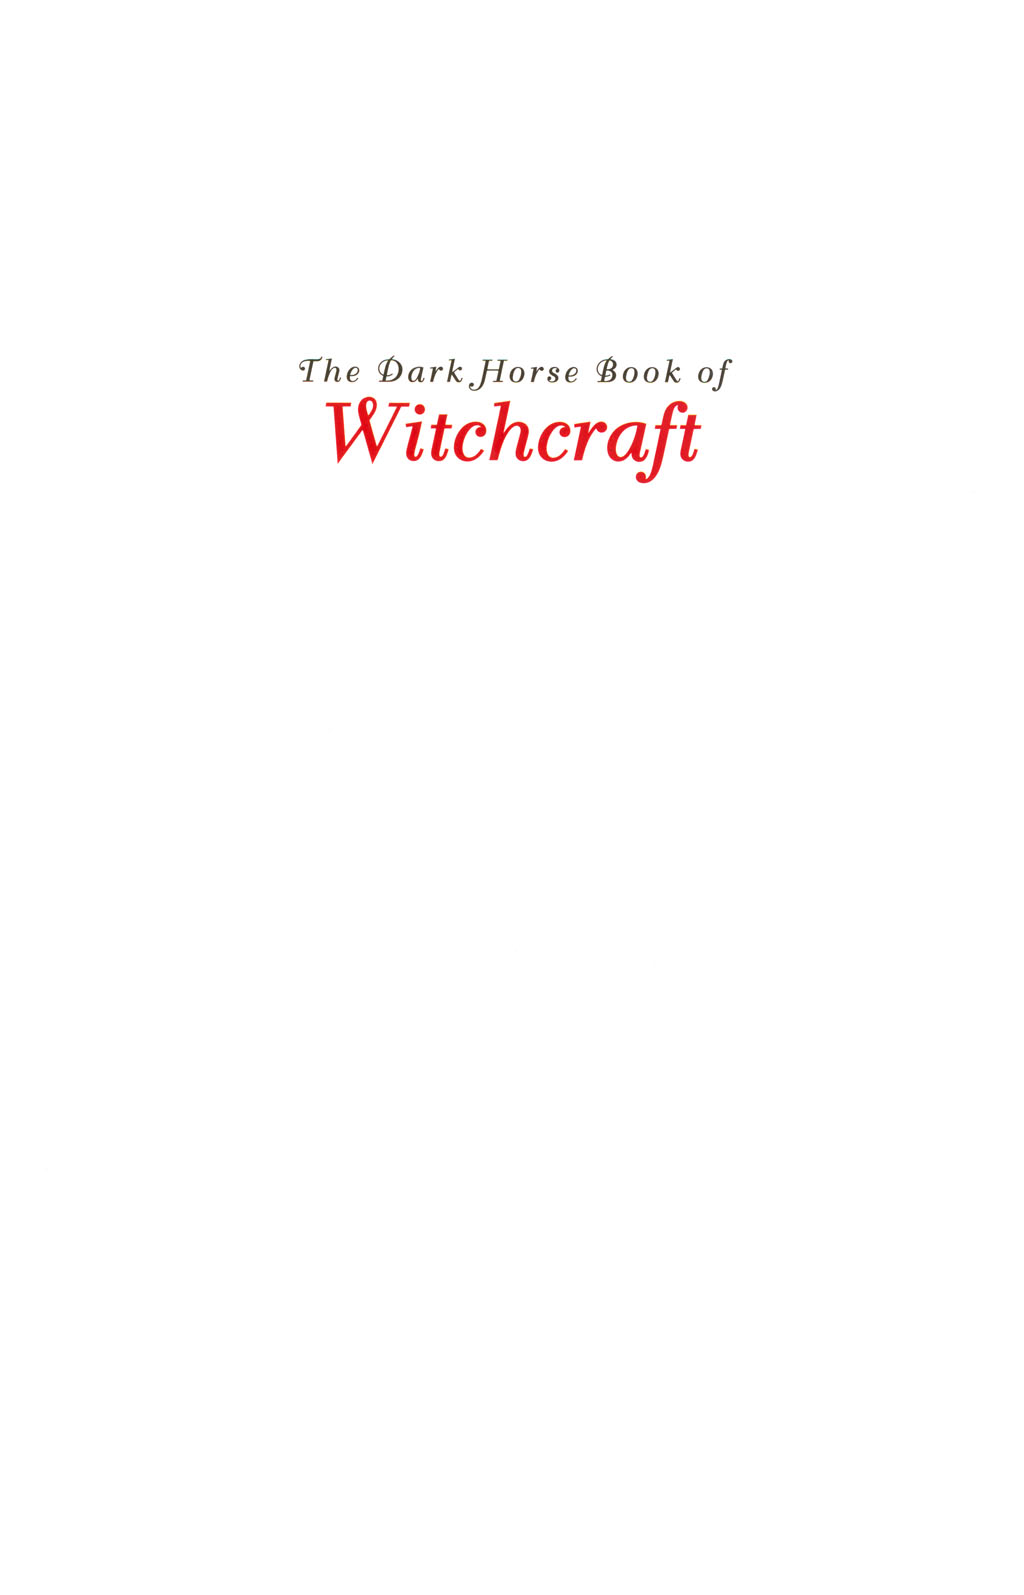 Read online The Dark Horse Book of Witchcraft comic -  Issue # TPB - 3